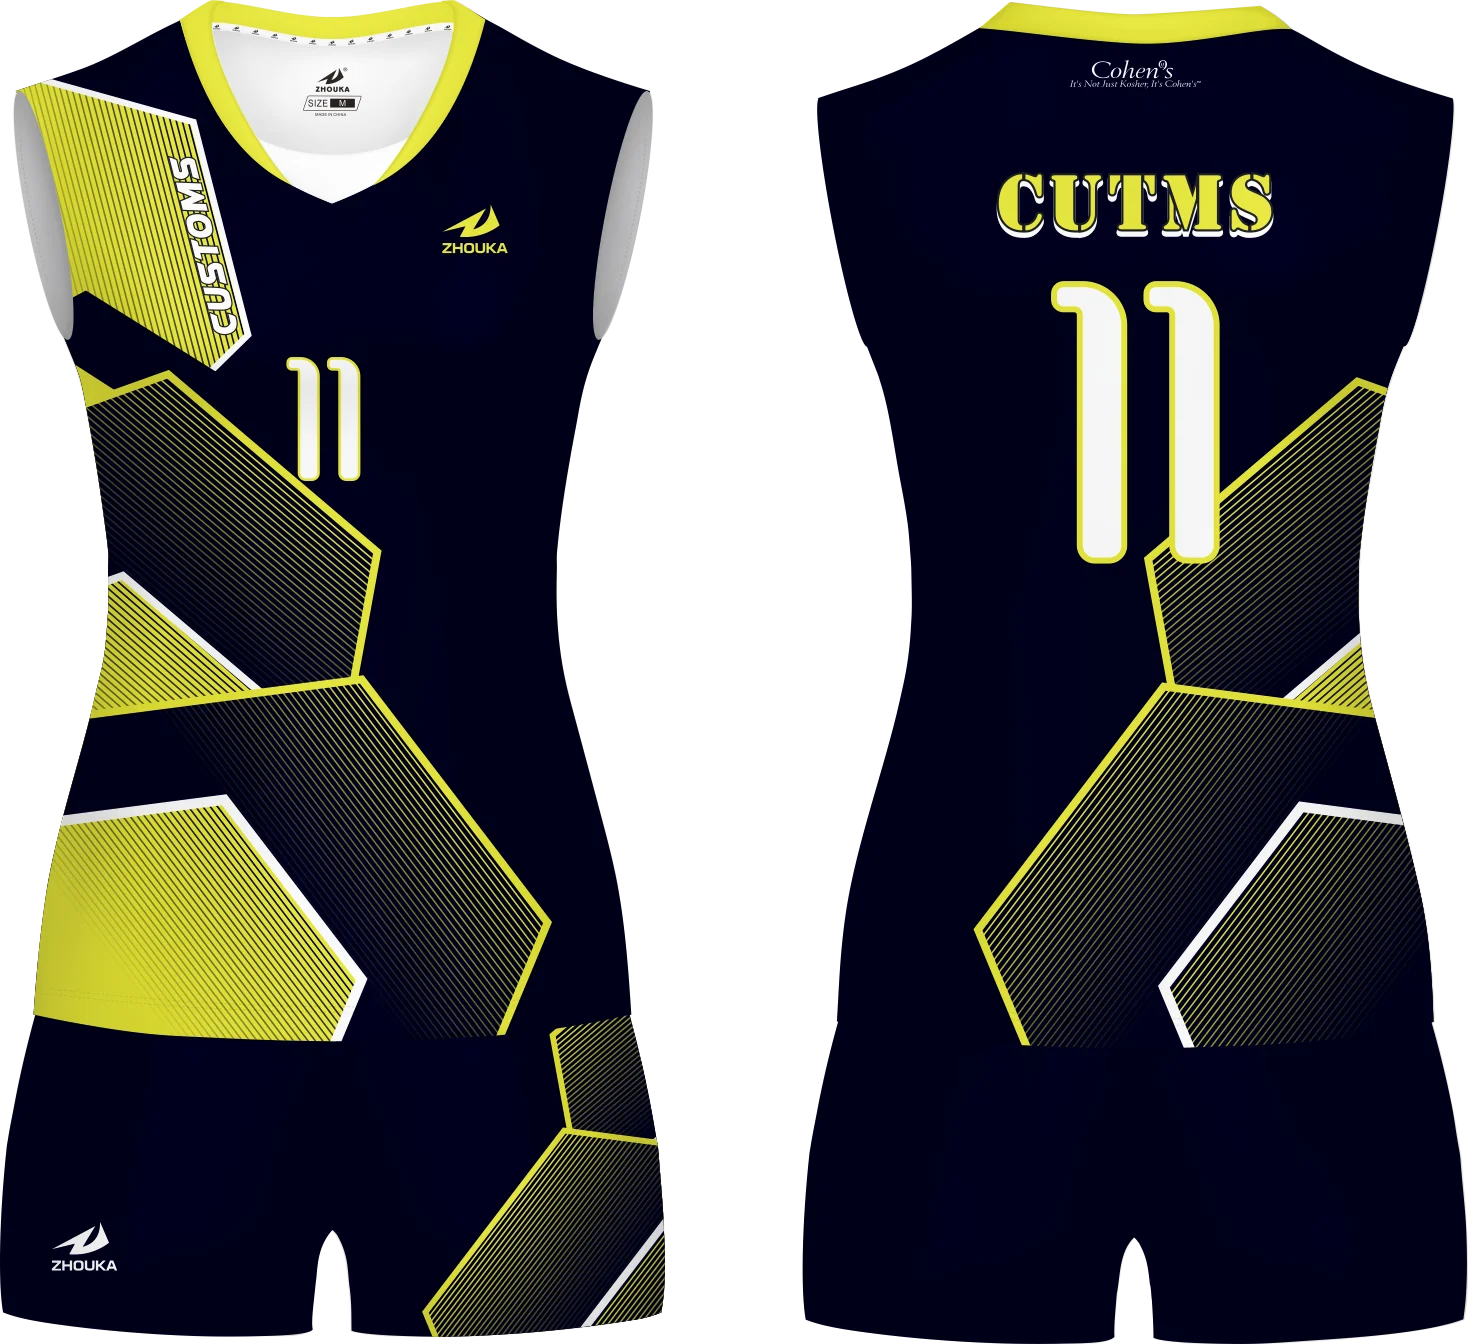 new model volleyball jersey